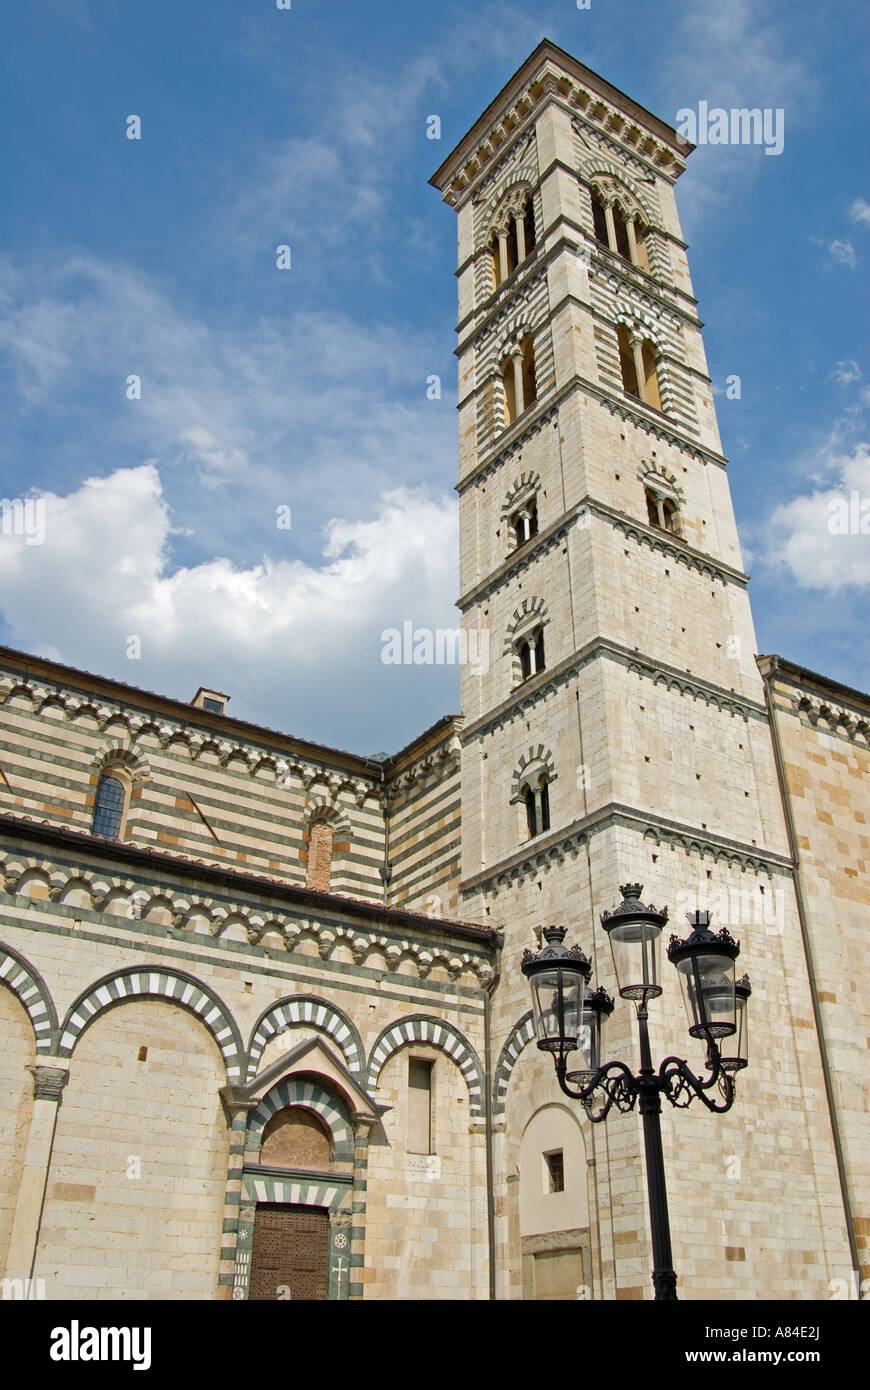 Prato, Tuscany, Italy. Cattedrale Santo Stefano (St Stephen's Cathedral - 12thC) in Piazza del Duomo Stock Photo